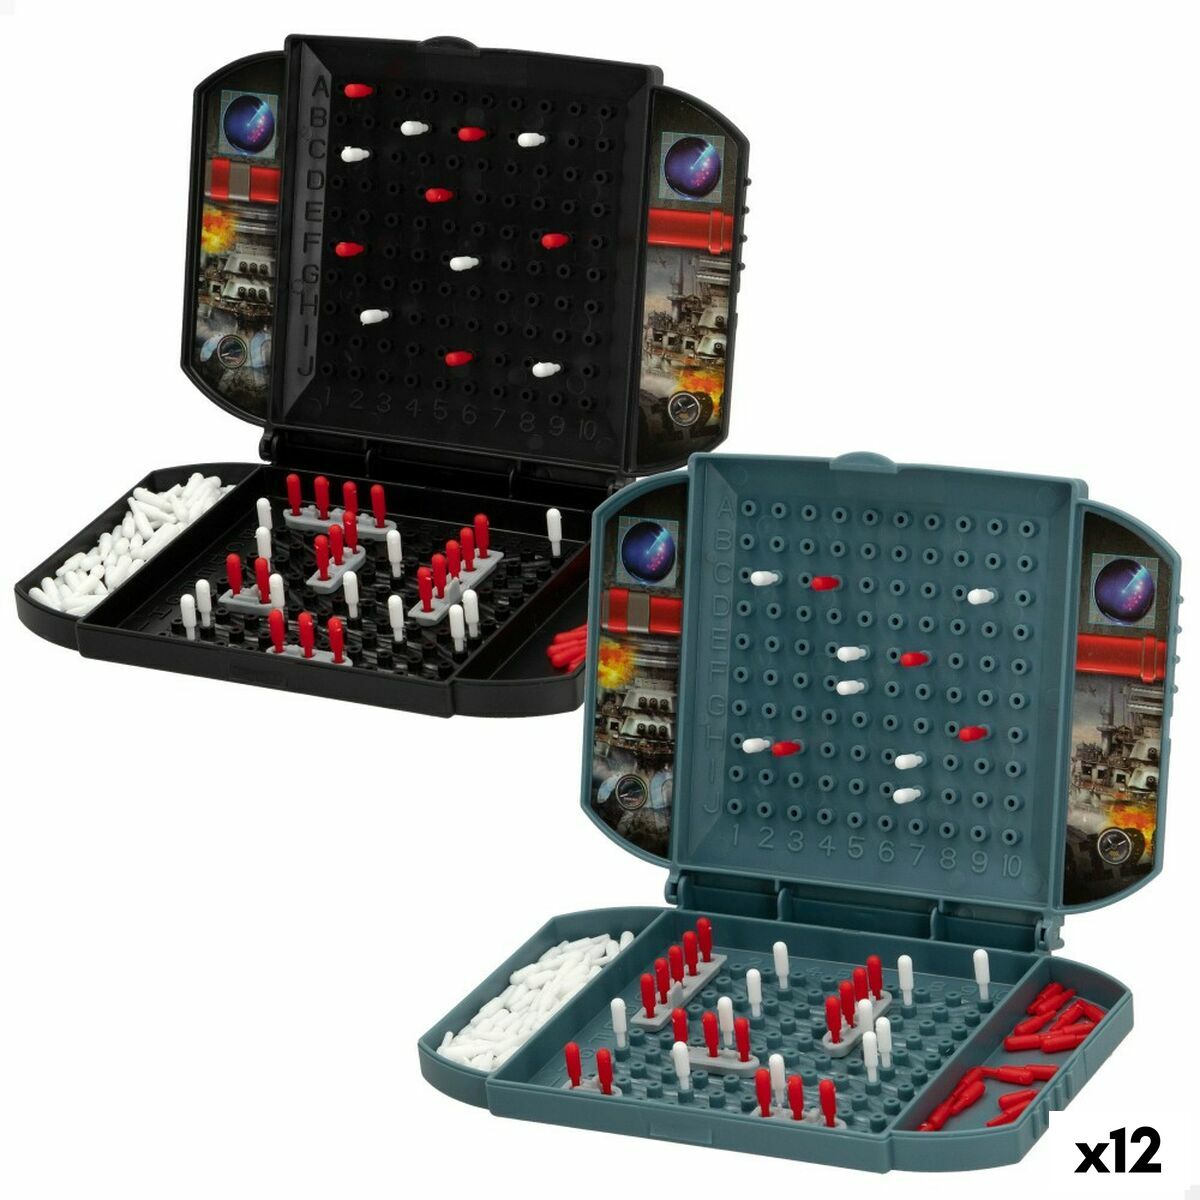 Board game Colorbaby Battle ship (12 Units)